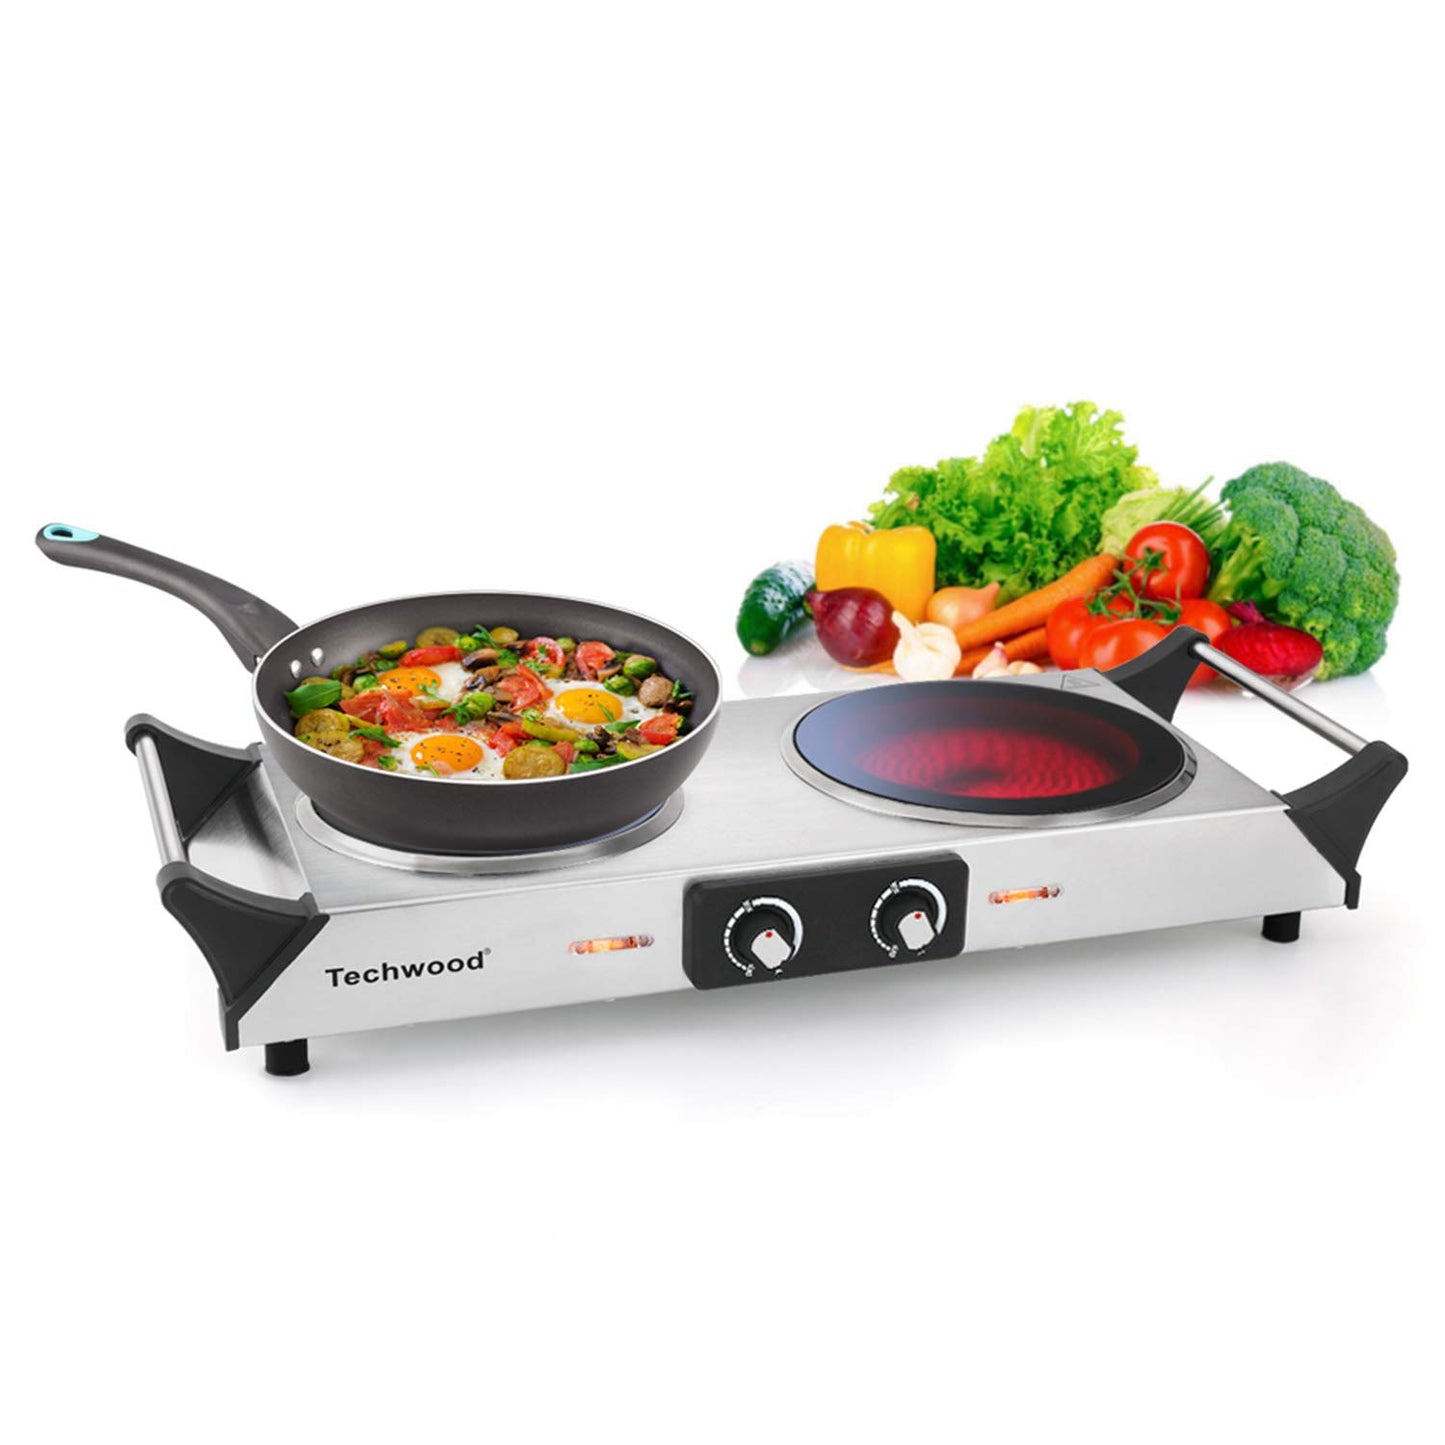 Techwood 1800W Dual Control Infrared Ceramic Electric Hot Plate with Anti-Scald Handle(Silver)